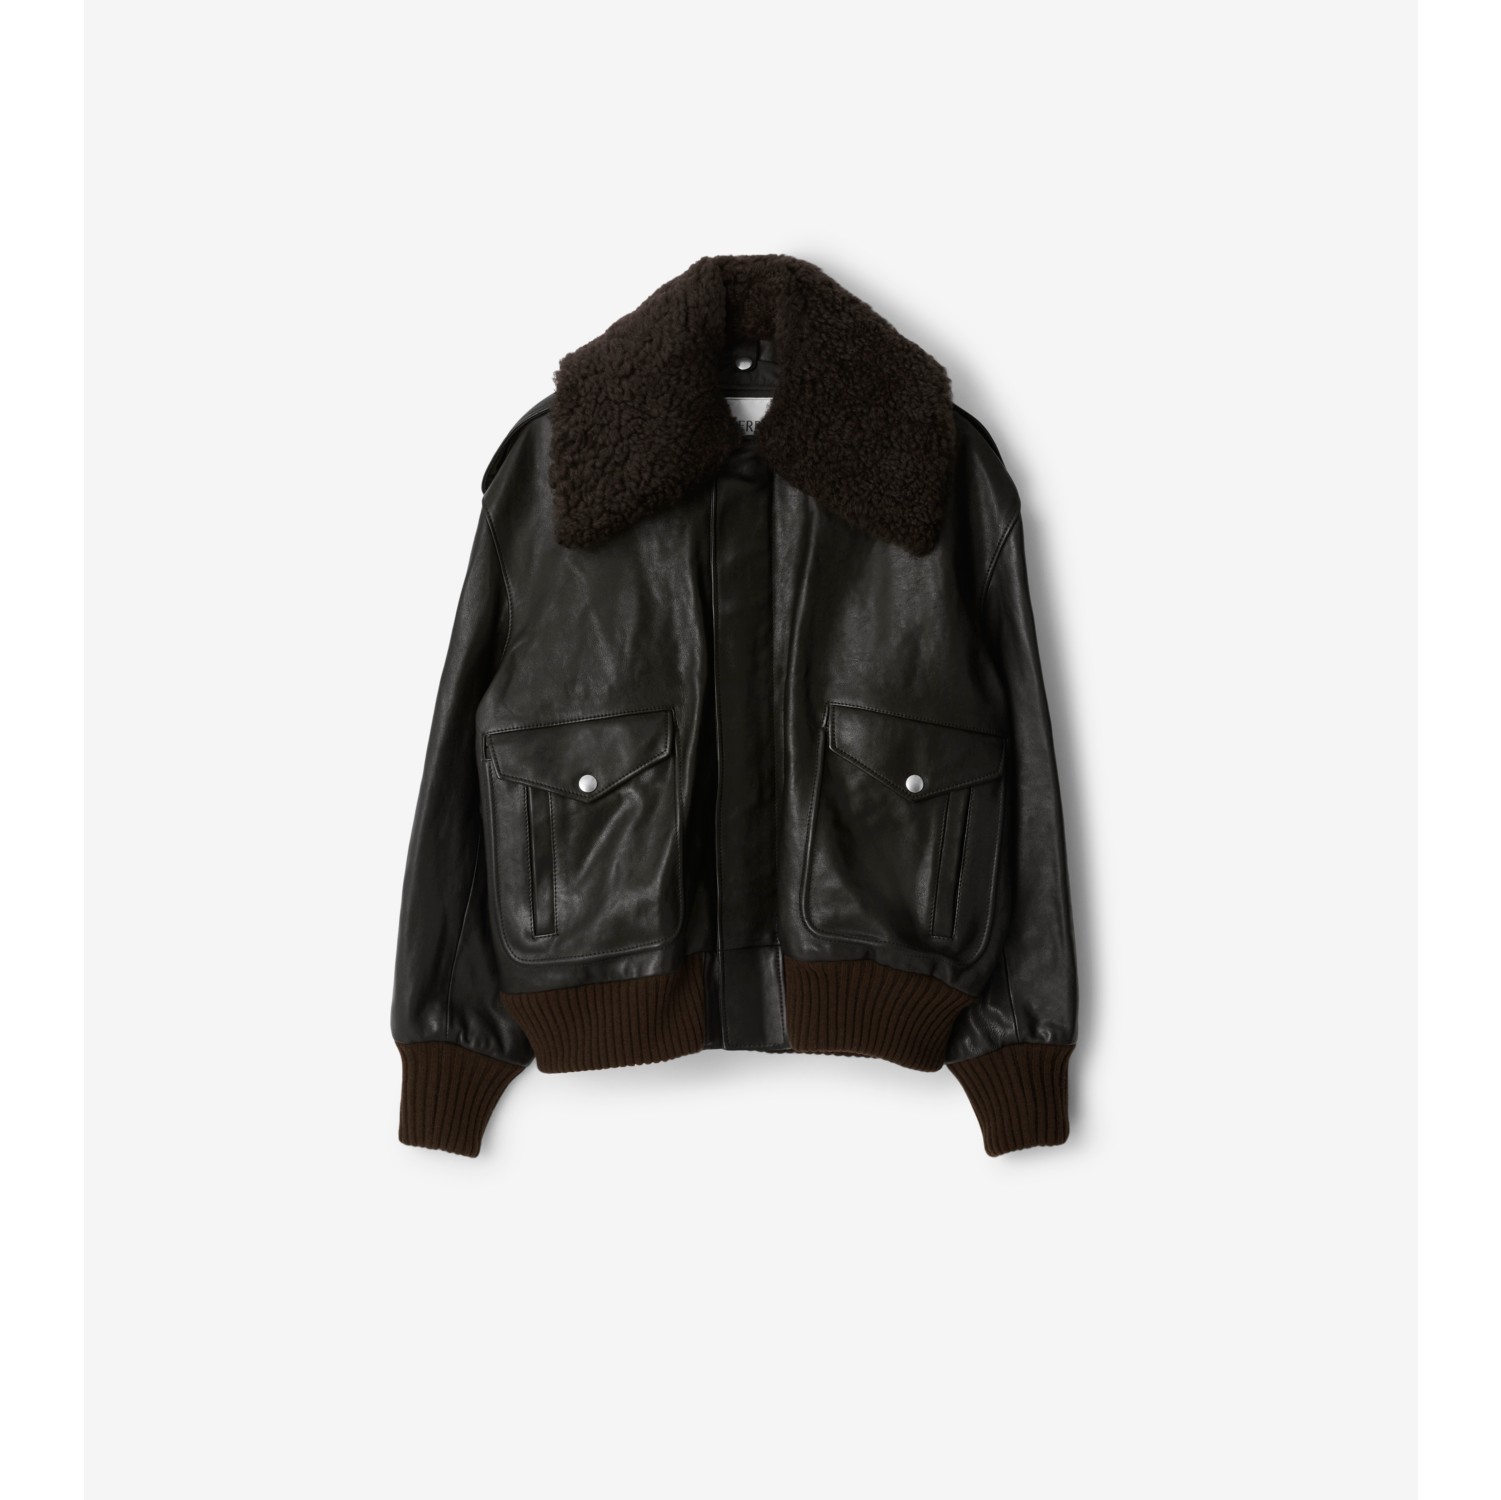 Burberry Men's Shearling-Collar Leather Aviator Jacket